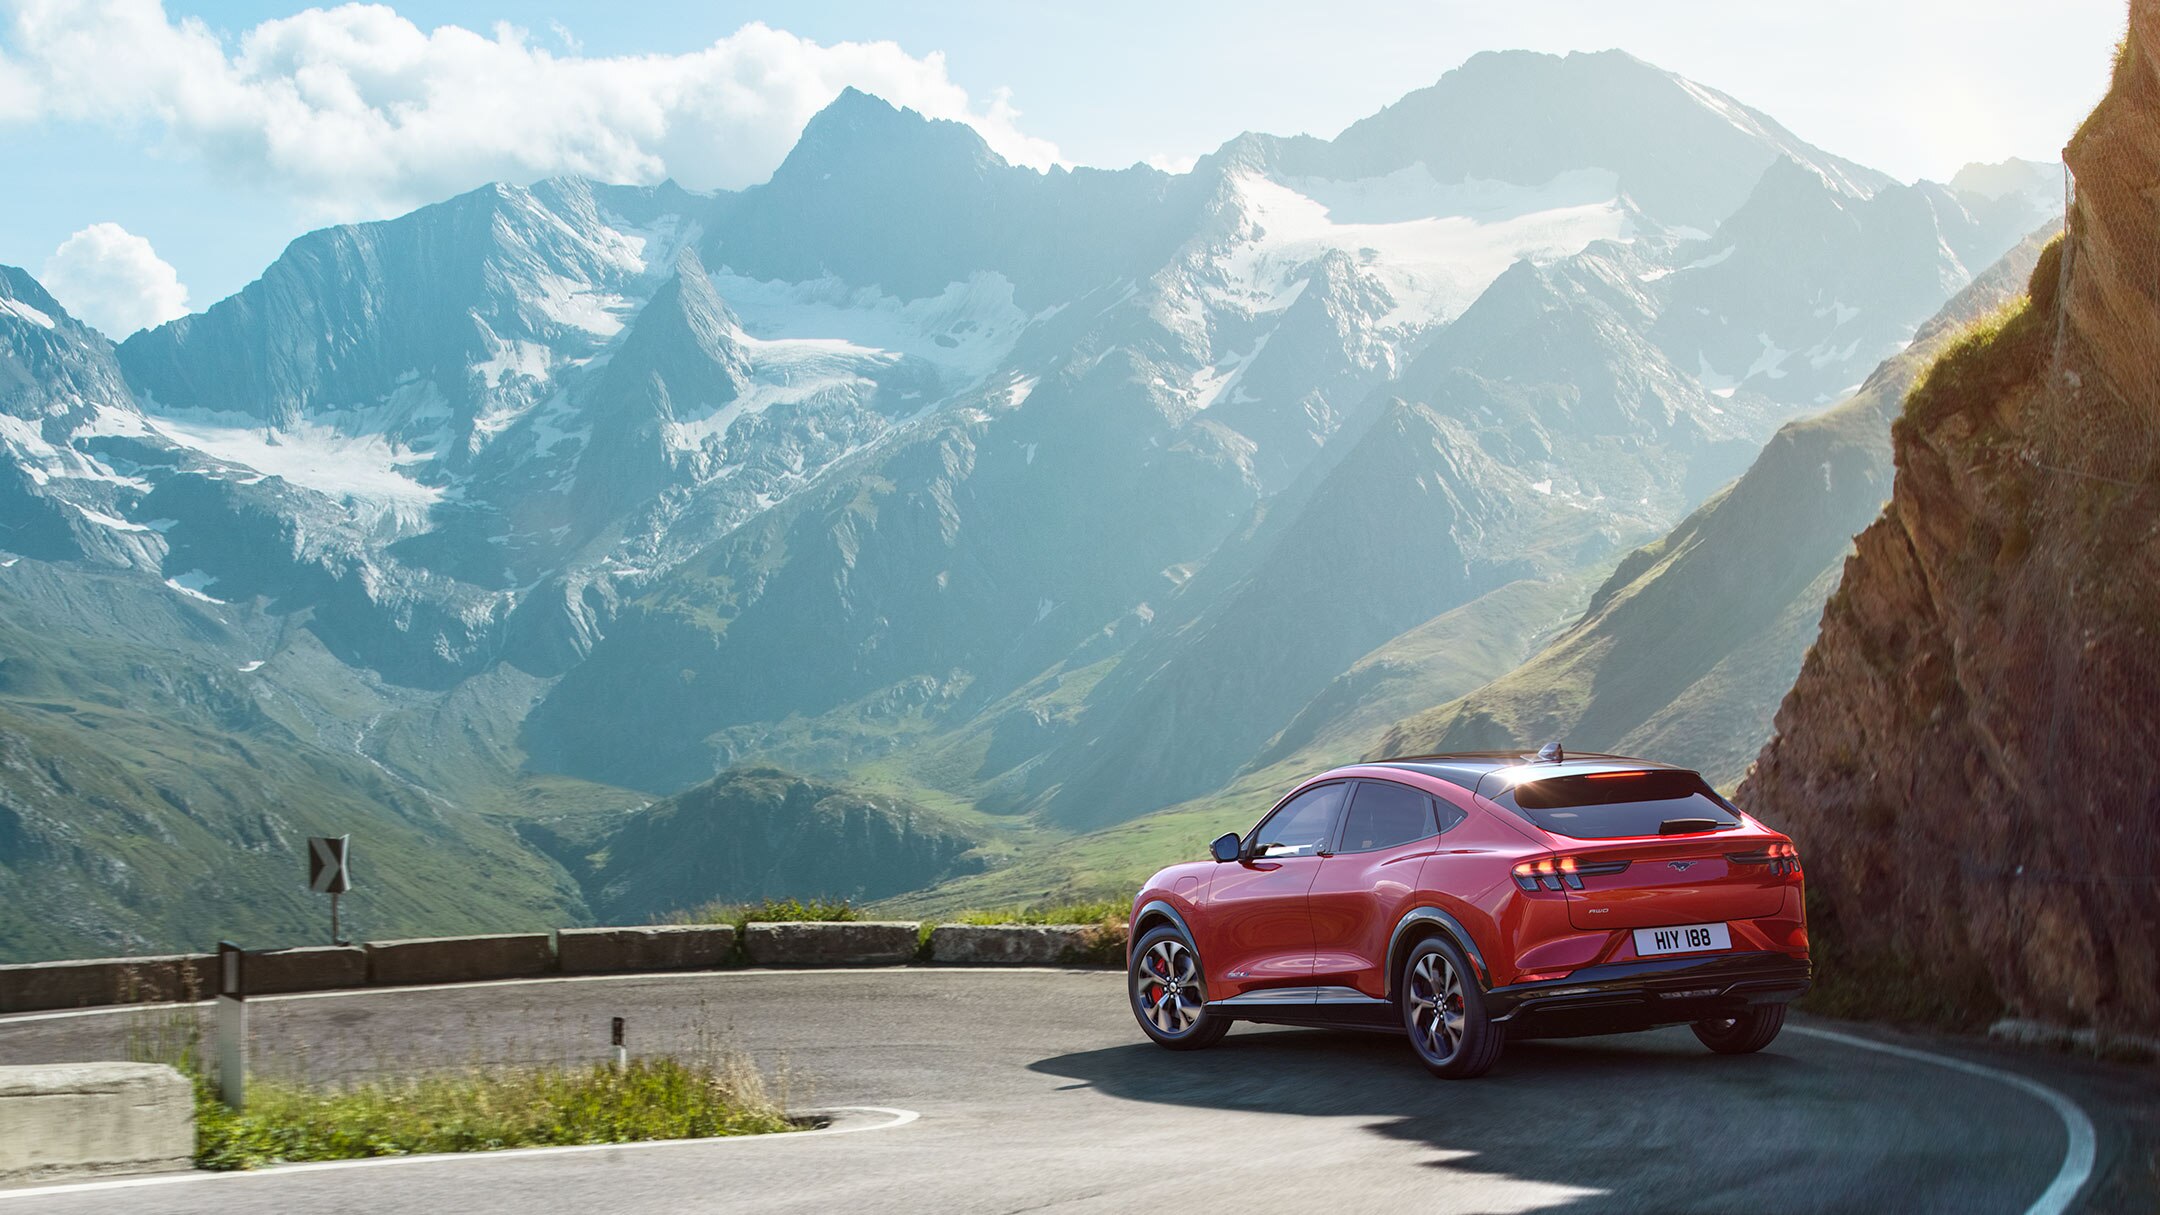 A red All-New Ford Mustang Mach-E driving on the road in the mountains